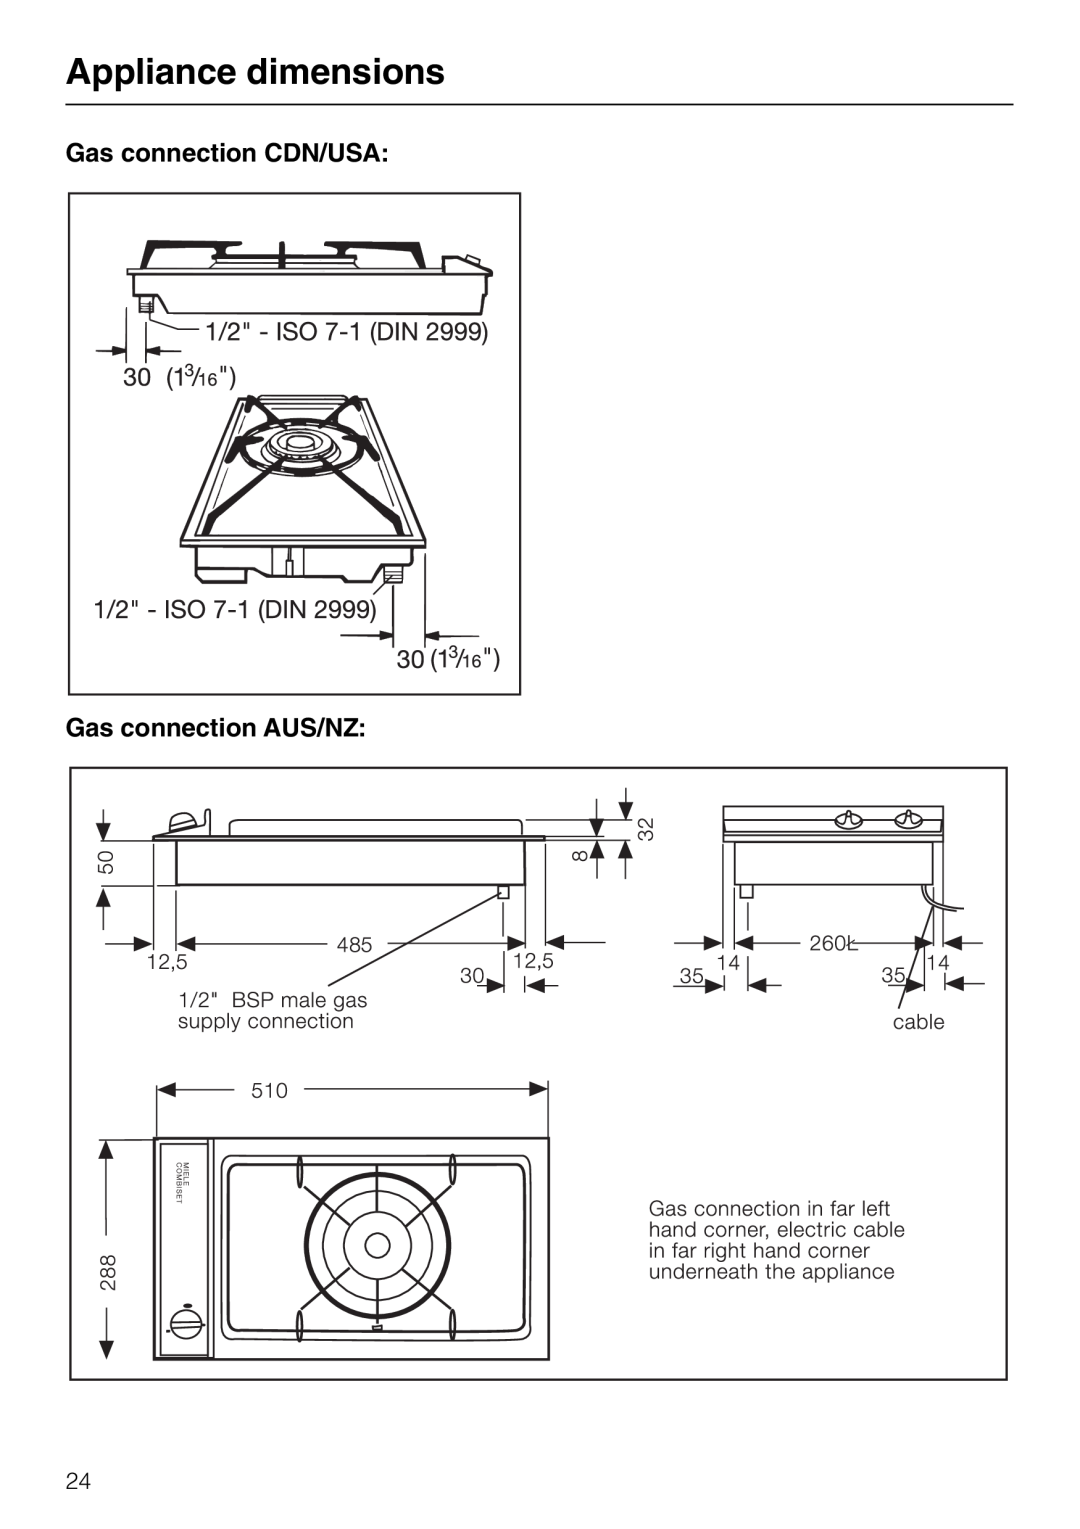 Miele KM 81-2 operating instructions Gas connection CDN/USA Gas connection AUS/NZ, Appliance dimensions 